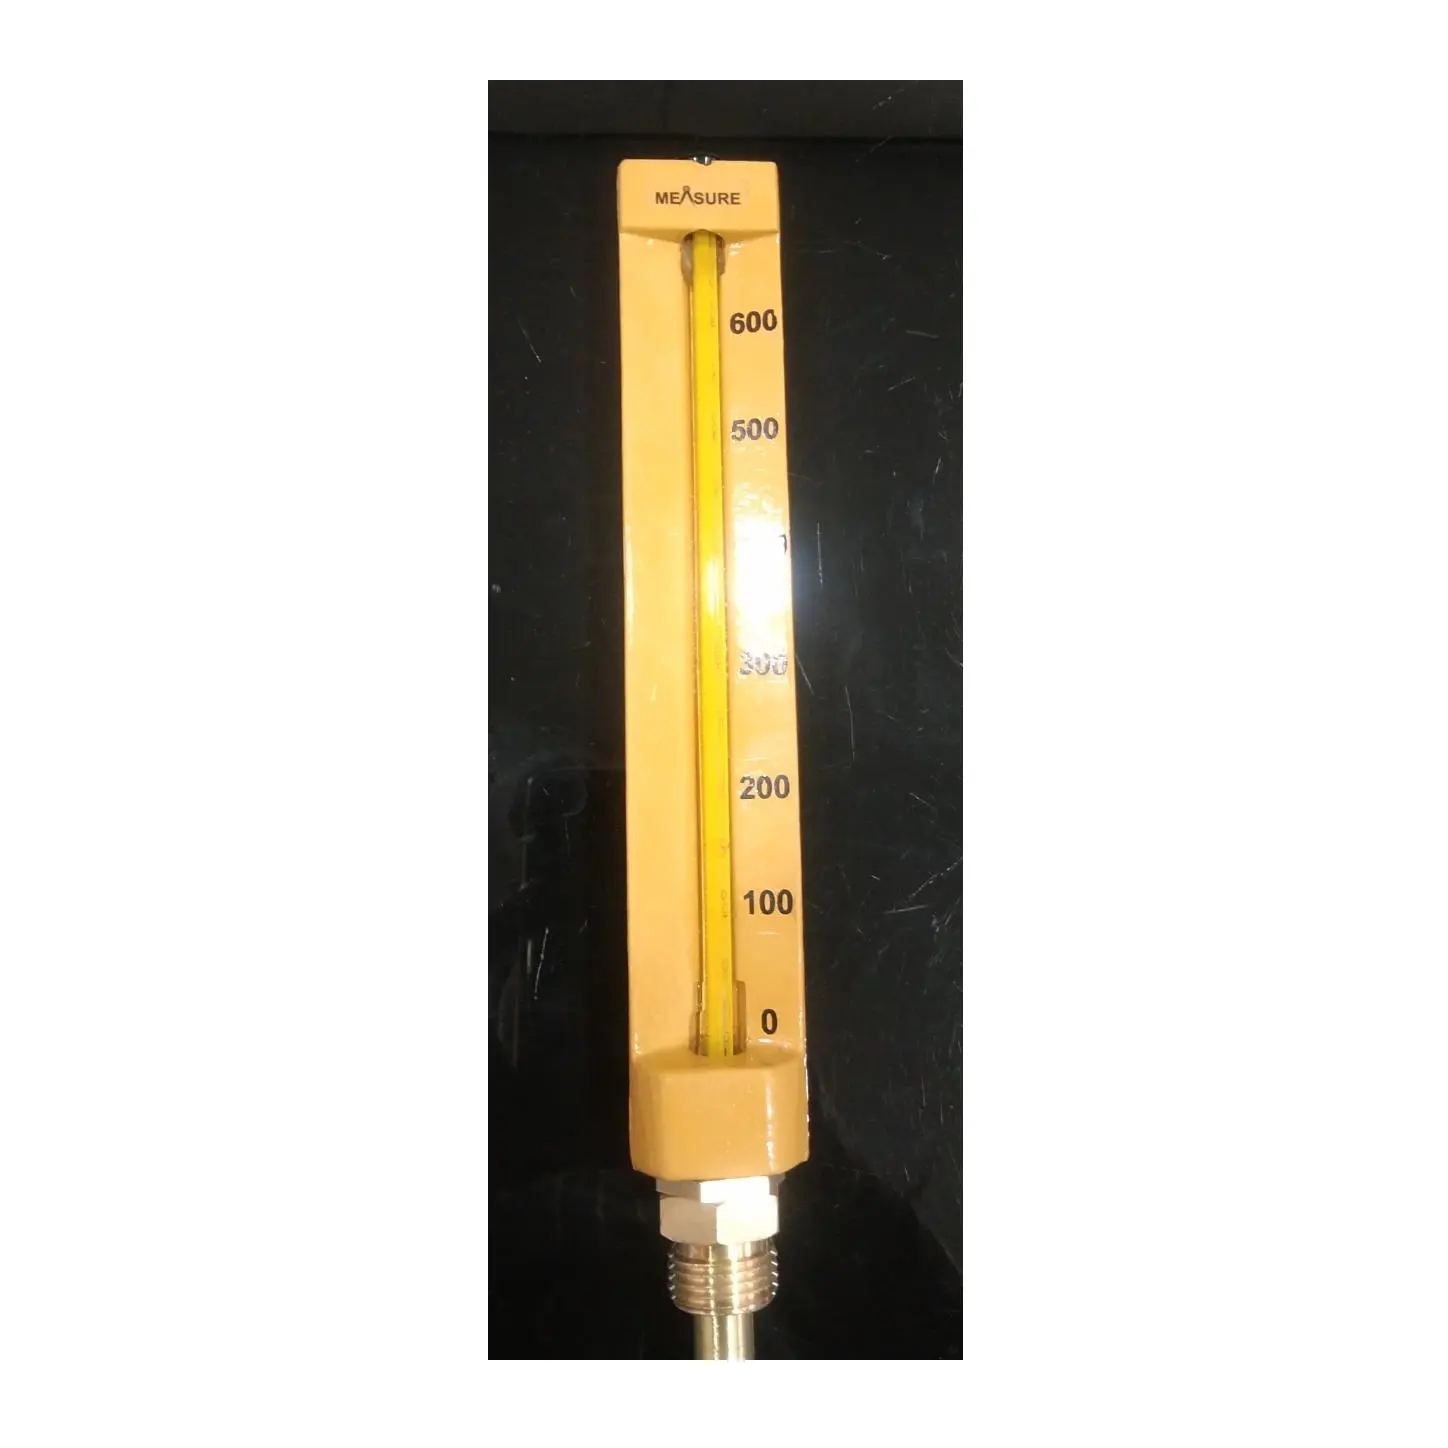 Best Quality Testing Instrument and Equipment Glass Thermometers for Worldwide Exporter and Supplier